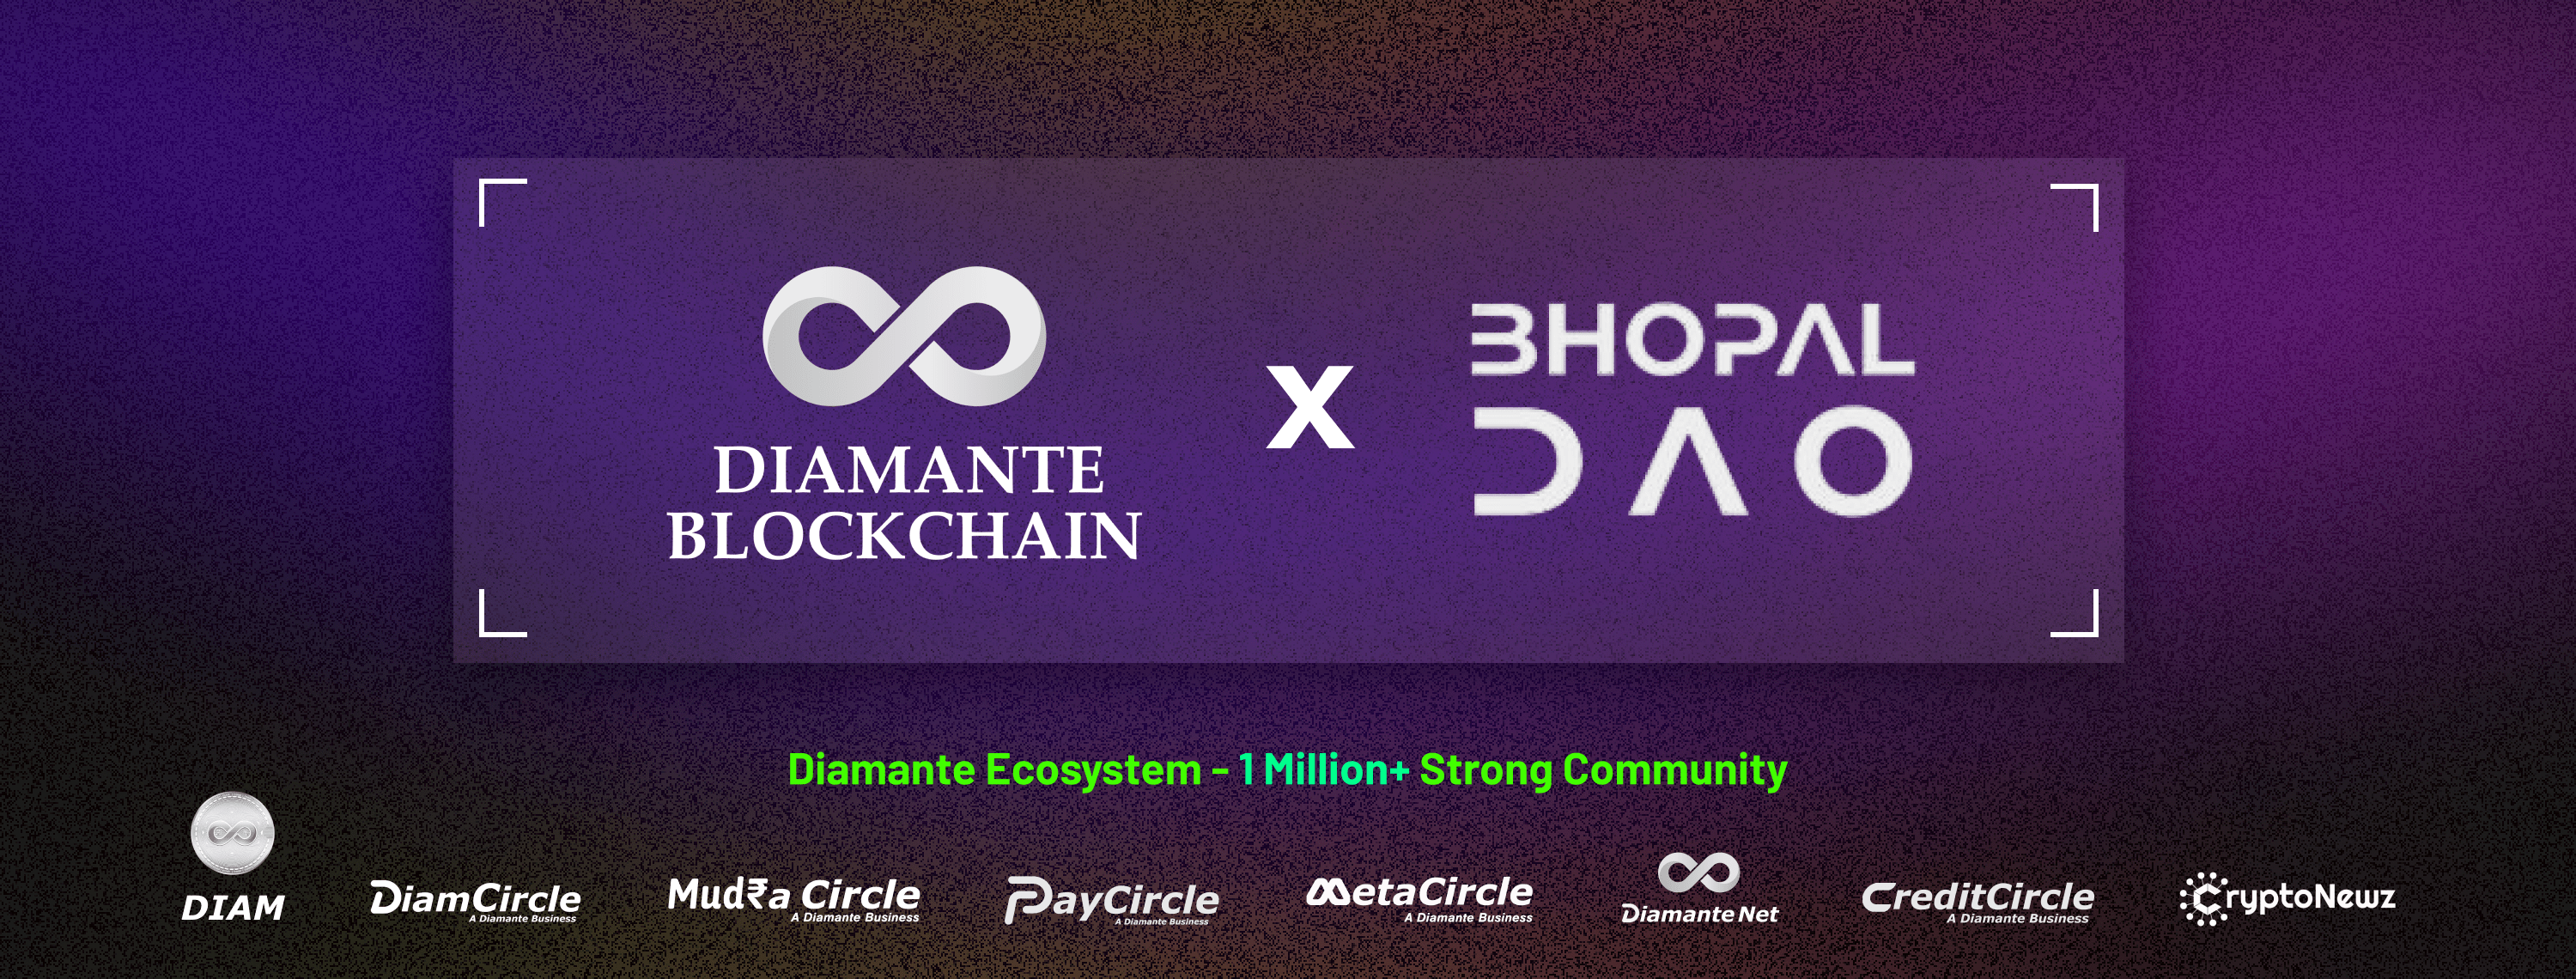 Image showcasing the collaboration between Diamante Blockchain and Bhopal DAO. The visual highlights the partnership with logos of both organizations prominently displayed on a gradient purple background. The bottom section features logos of various Diamante Ecosystem projects, including DIAM, DiamCircle, Mudra Circle, PayCircle, MetaCircle, Diamante Net, CreditCircle, and CryptoNewz, emphasizing the ecosystem's robust community of over 1 million members